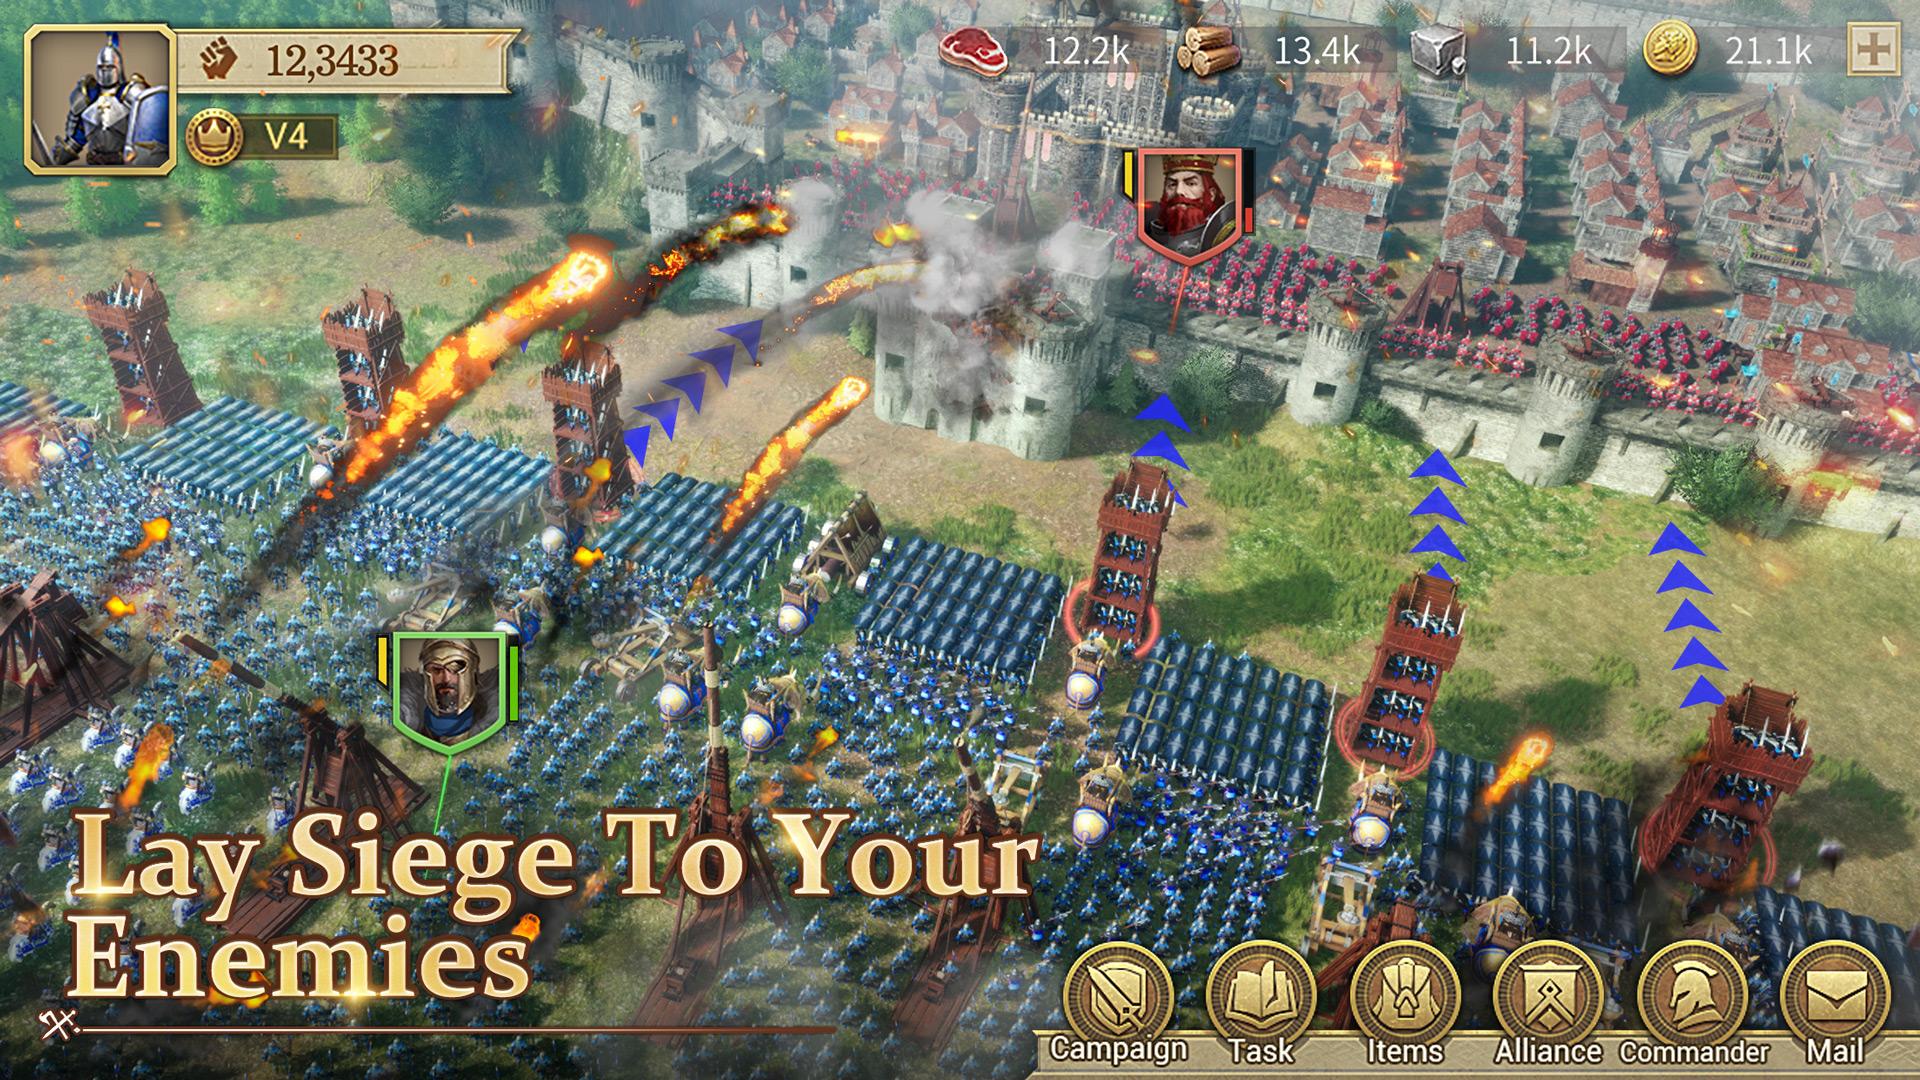 Gladiator Arena Idle Tycoon Mod. Joining in Wars. Gladiator arena idle tycoon